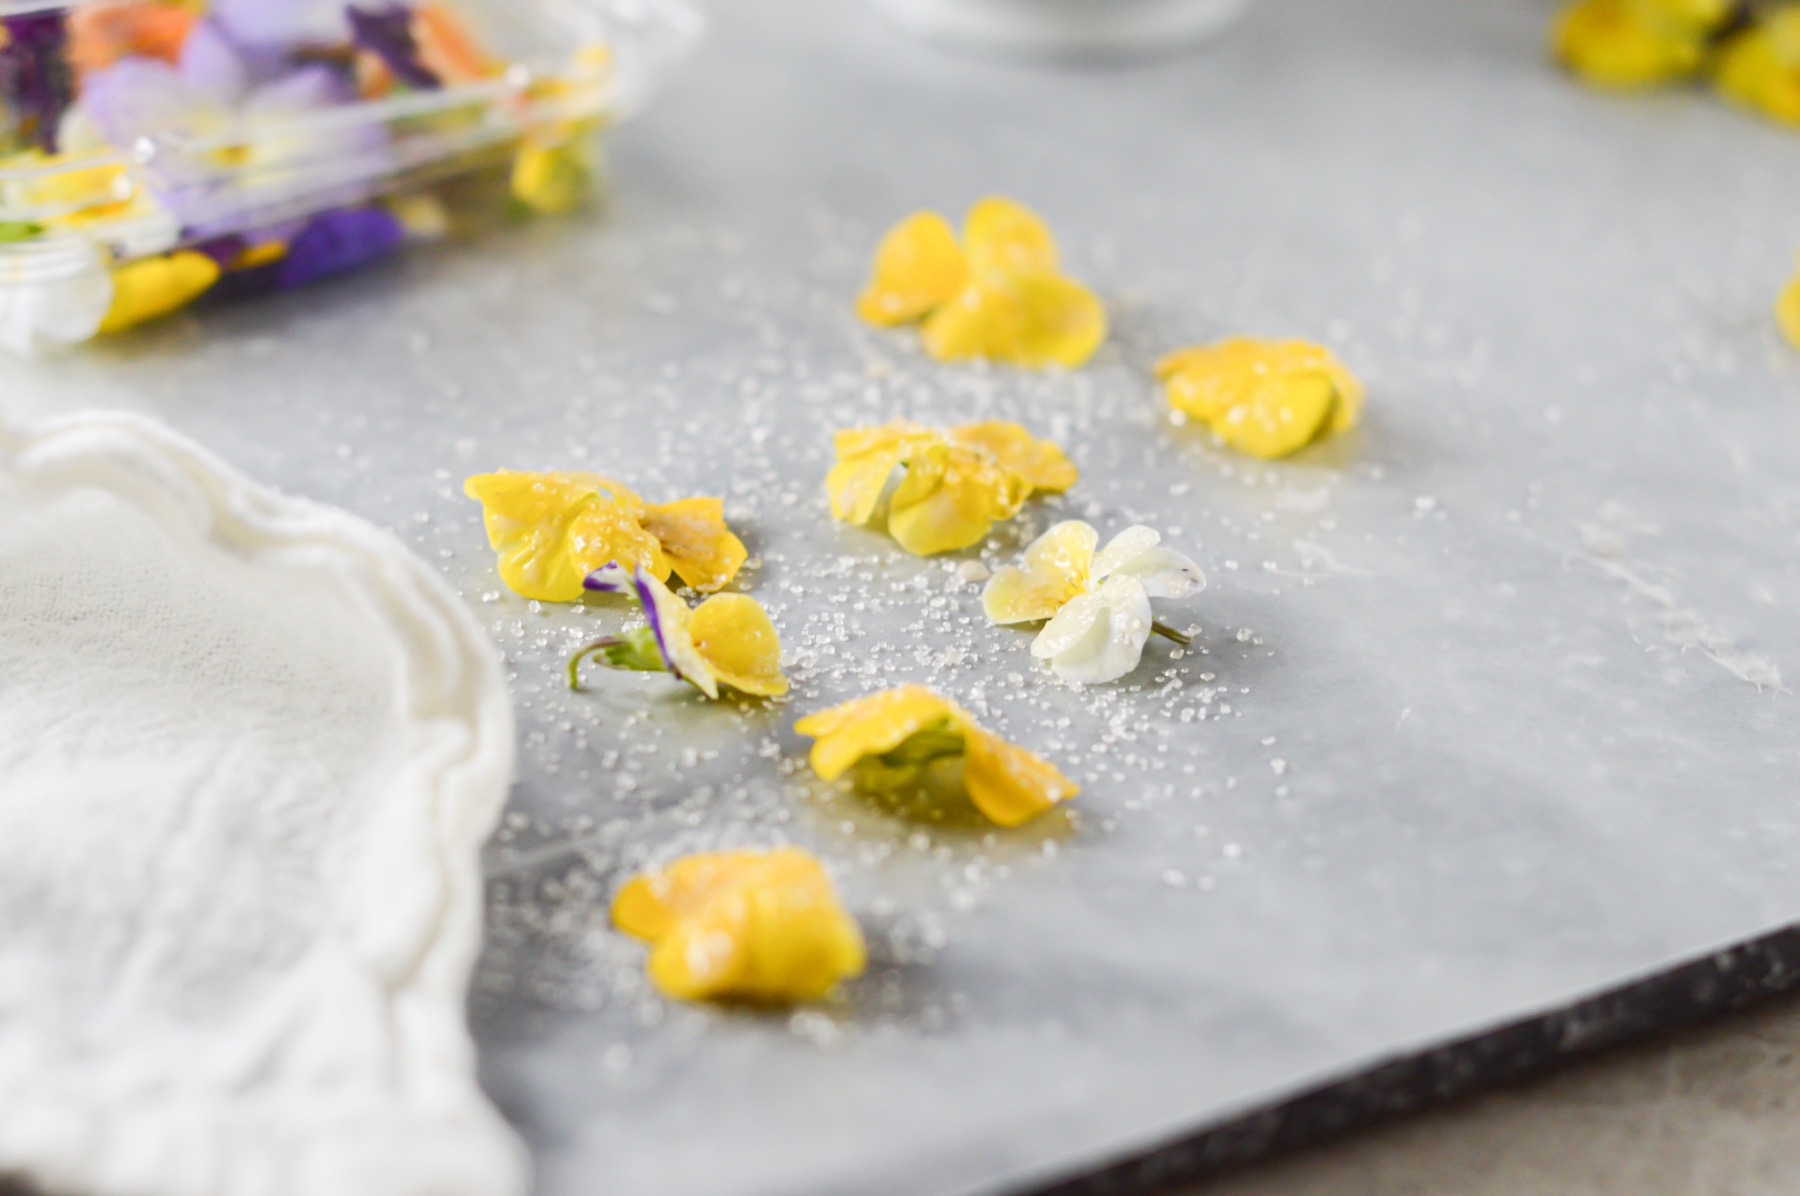 drying candied flowers on parchment